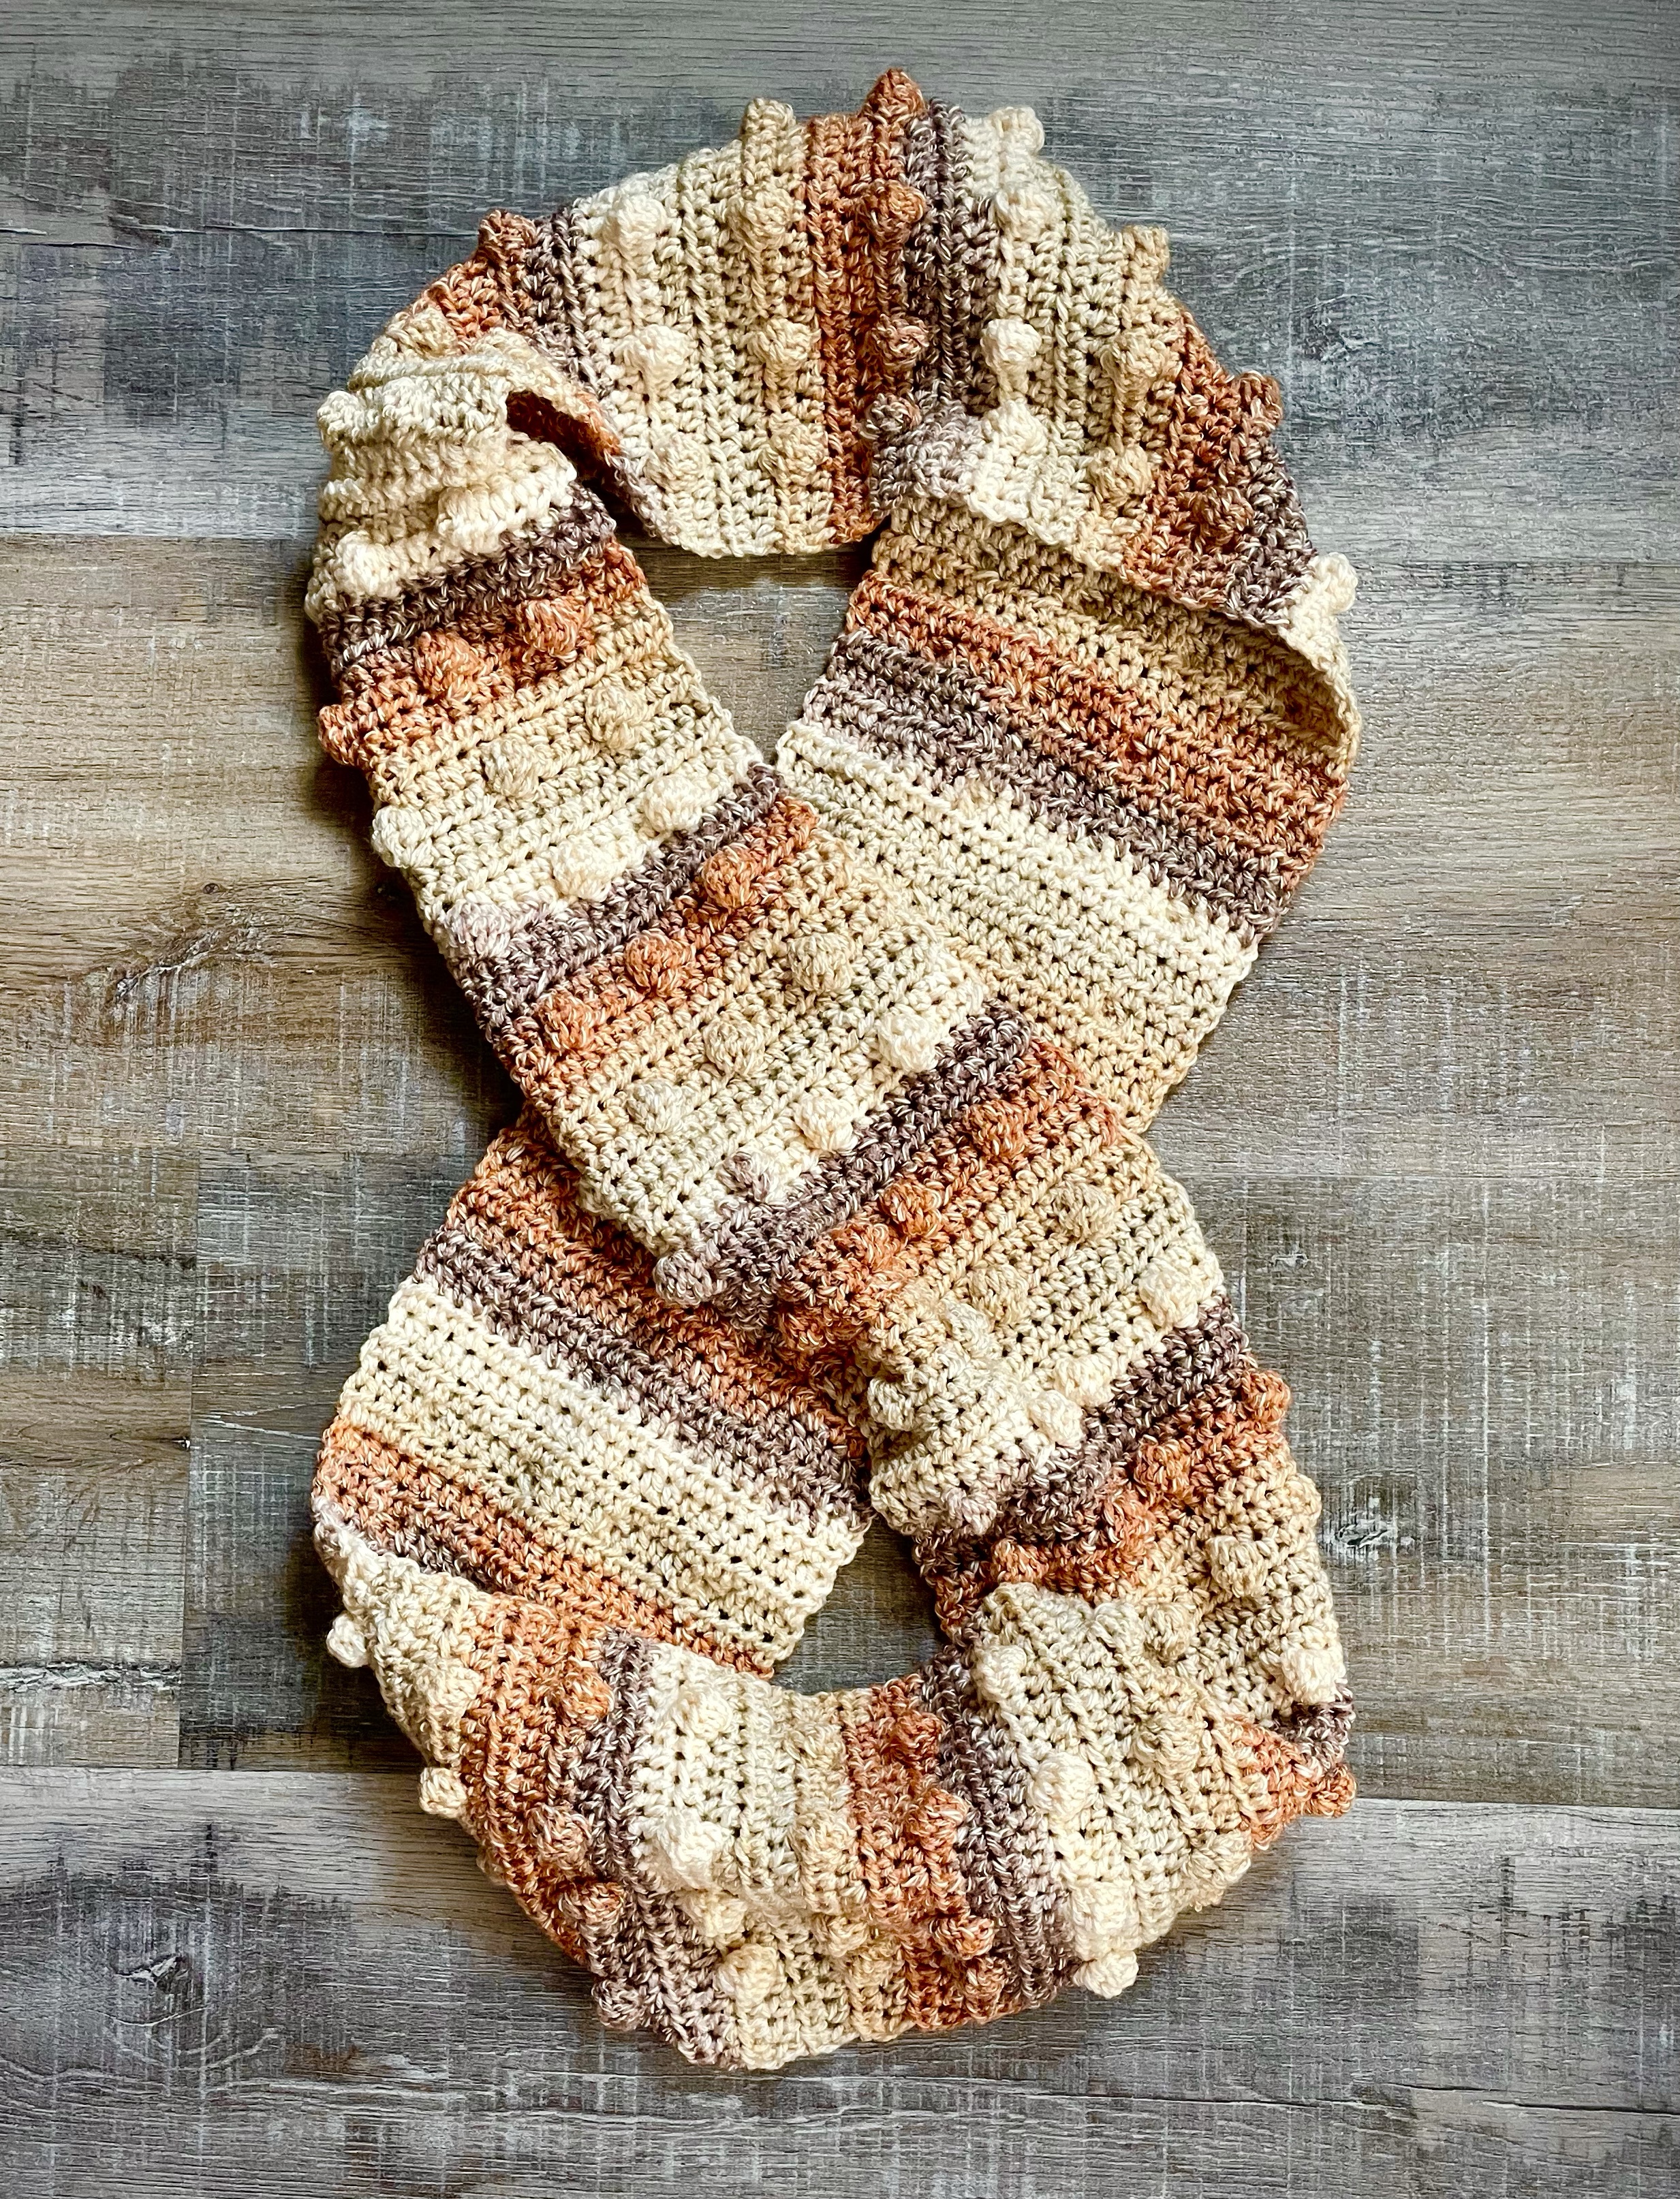 Vintage beige bobbly scarf made from crocheted cotton.